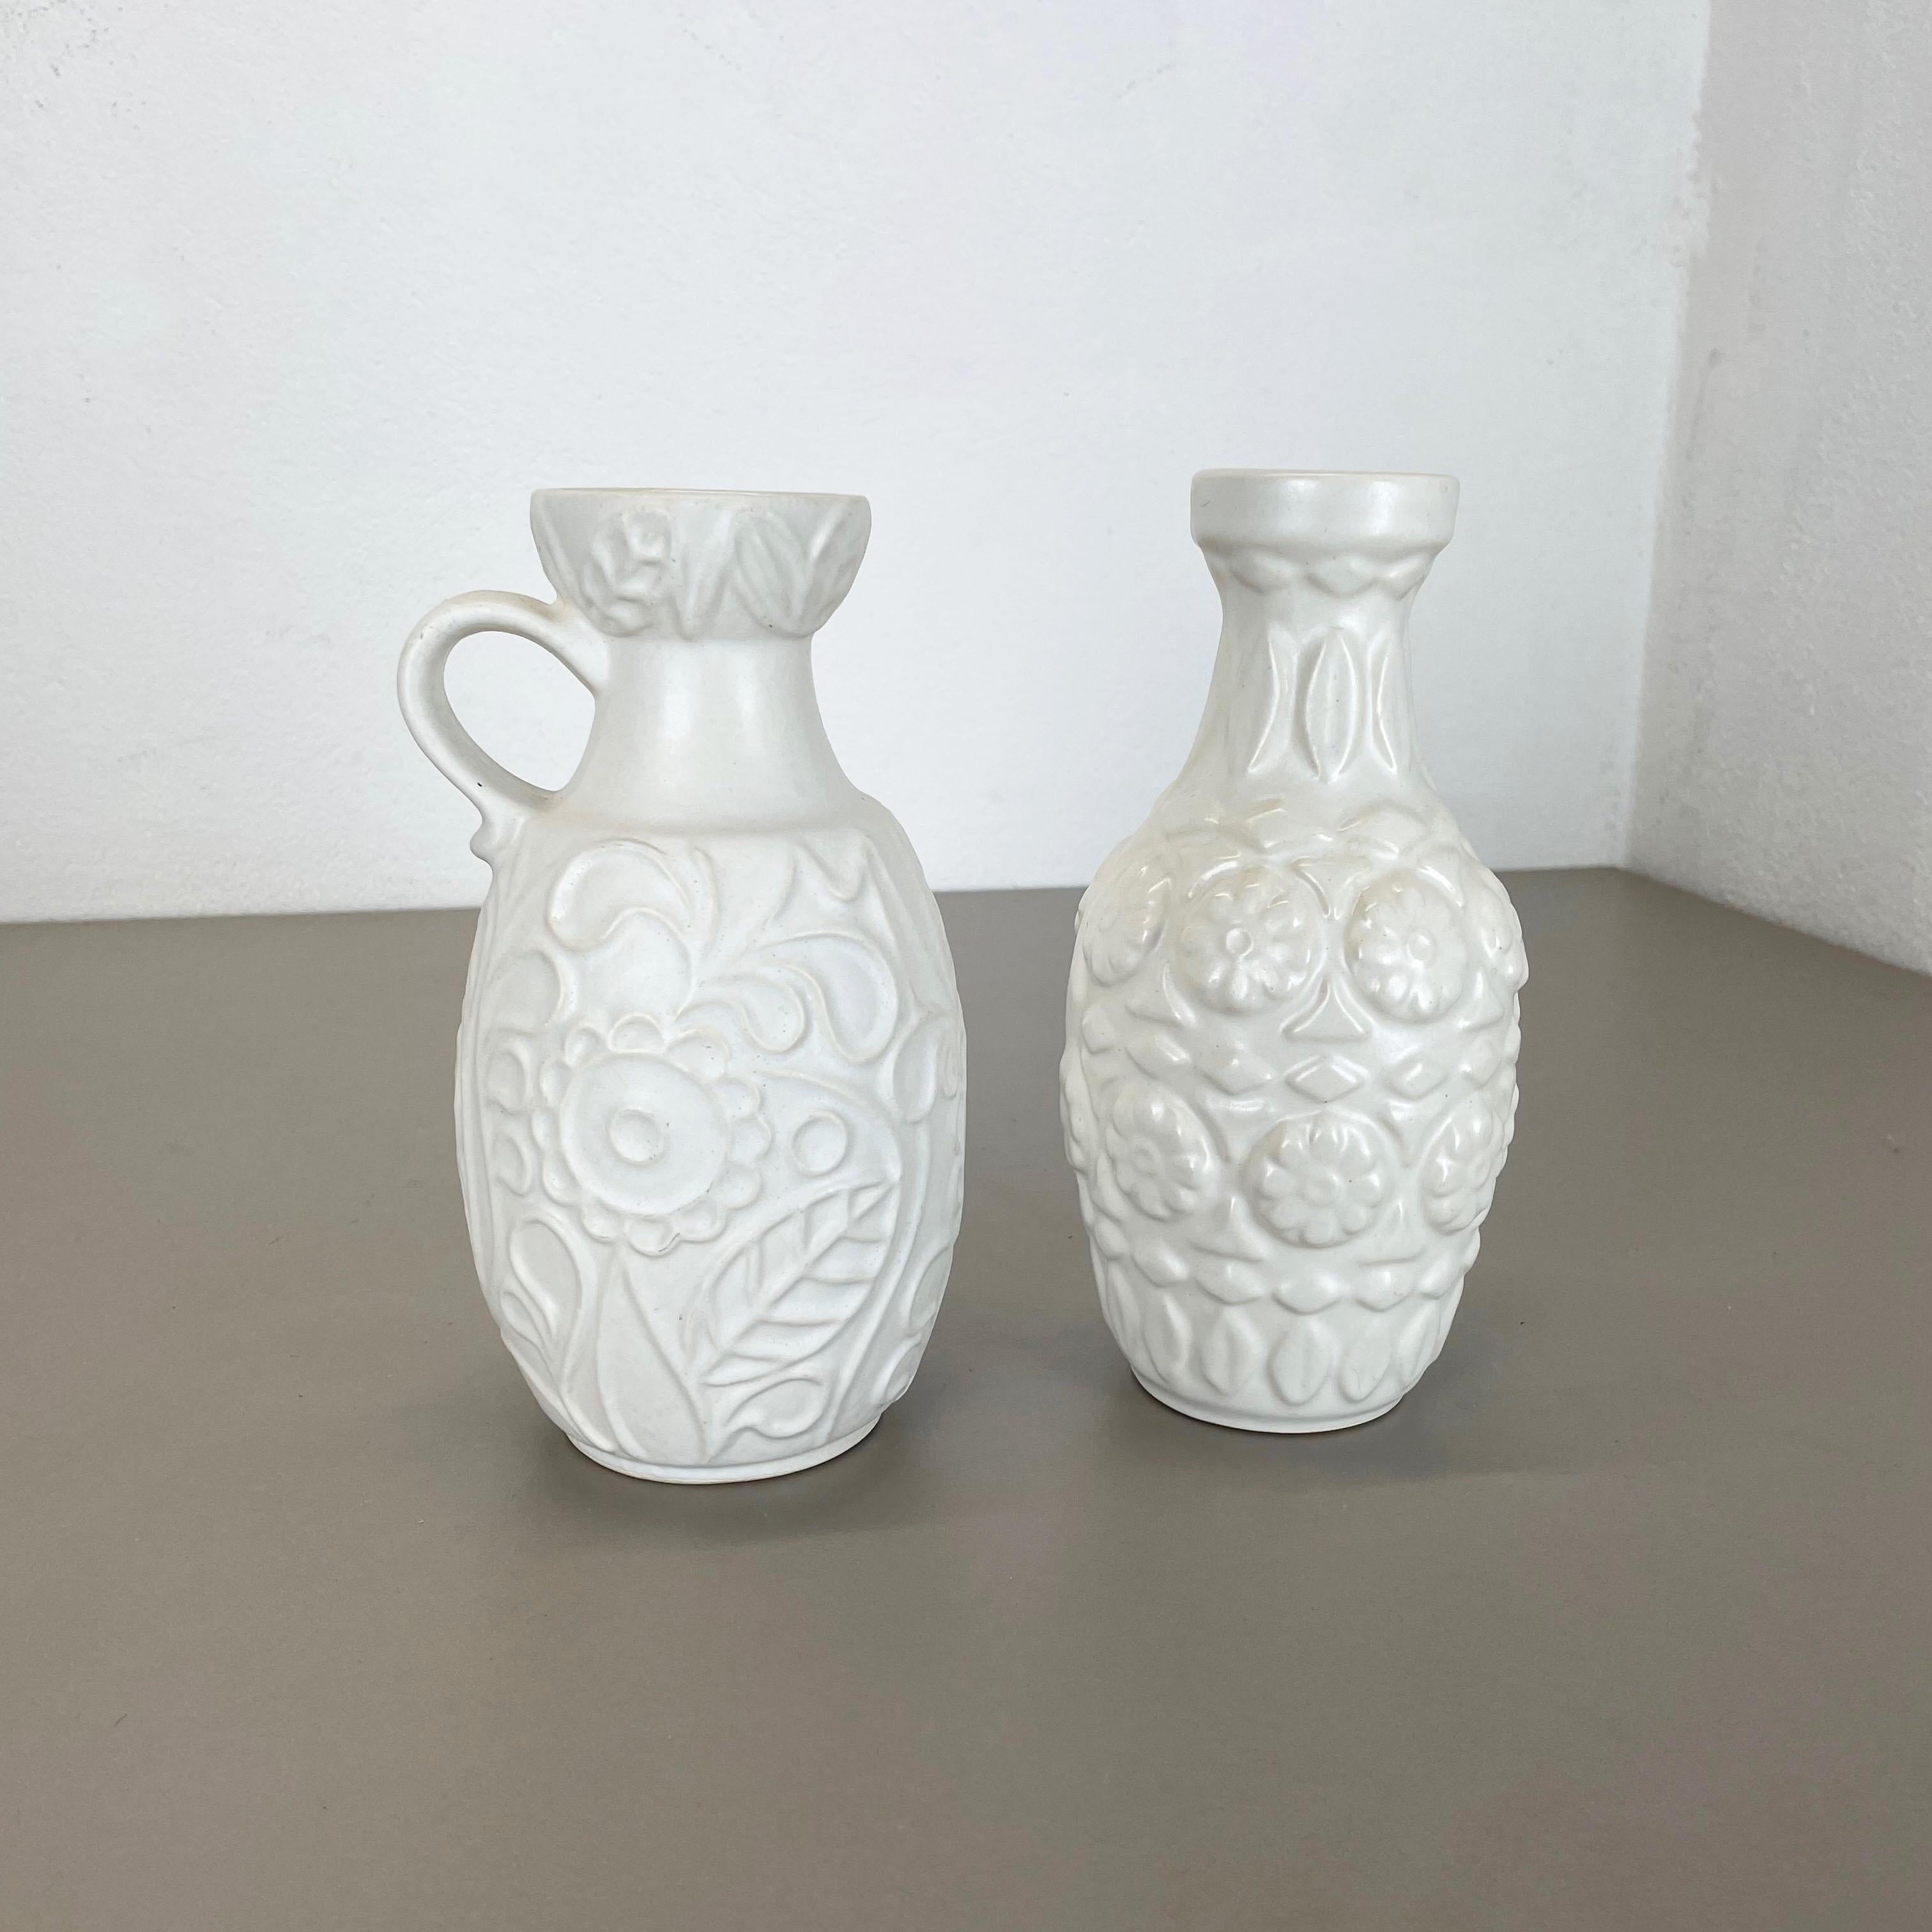 Set of 2 White Floral Fat Lava Op Art Pottery Vase Made Bay Ceramics, Germany In Good Condition For Sale In Kirchlengern, DE